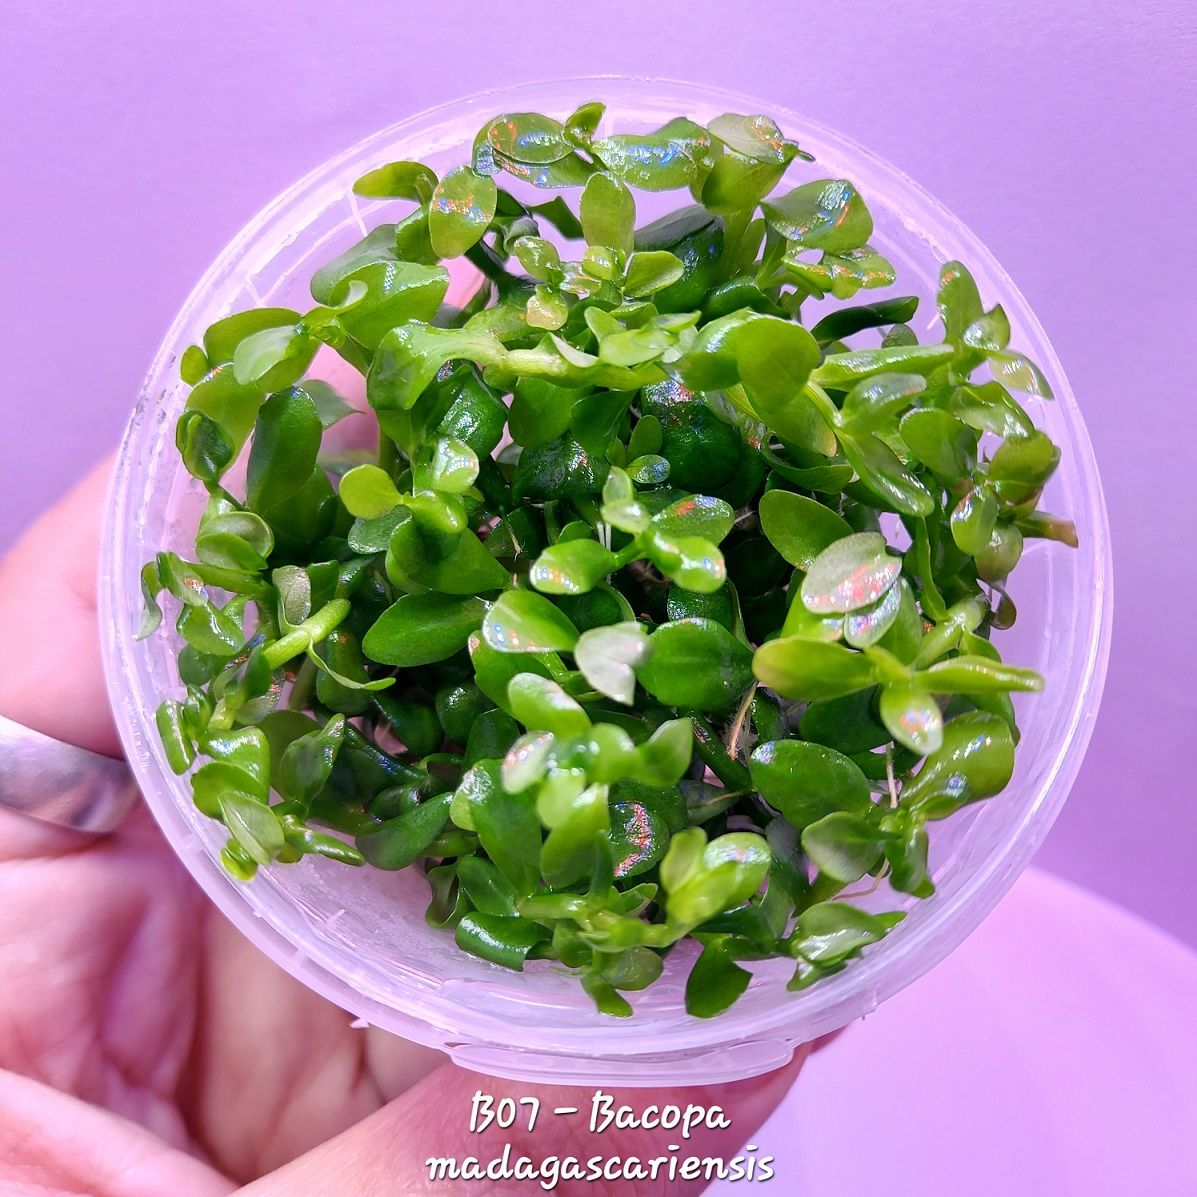 Bacopa madagascariensis IN VITRO CUP